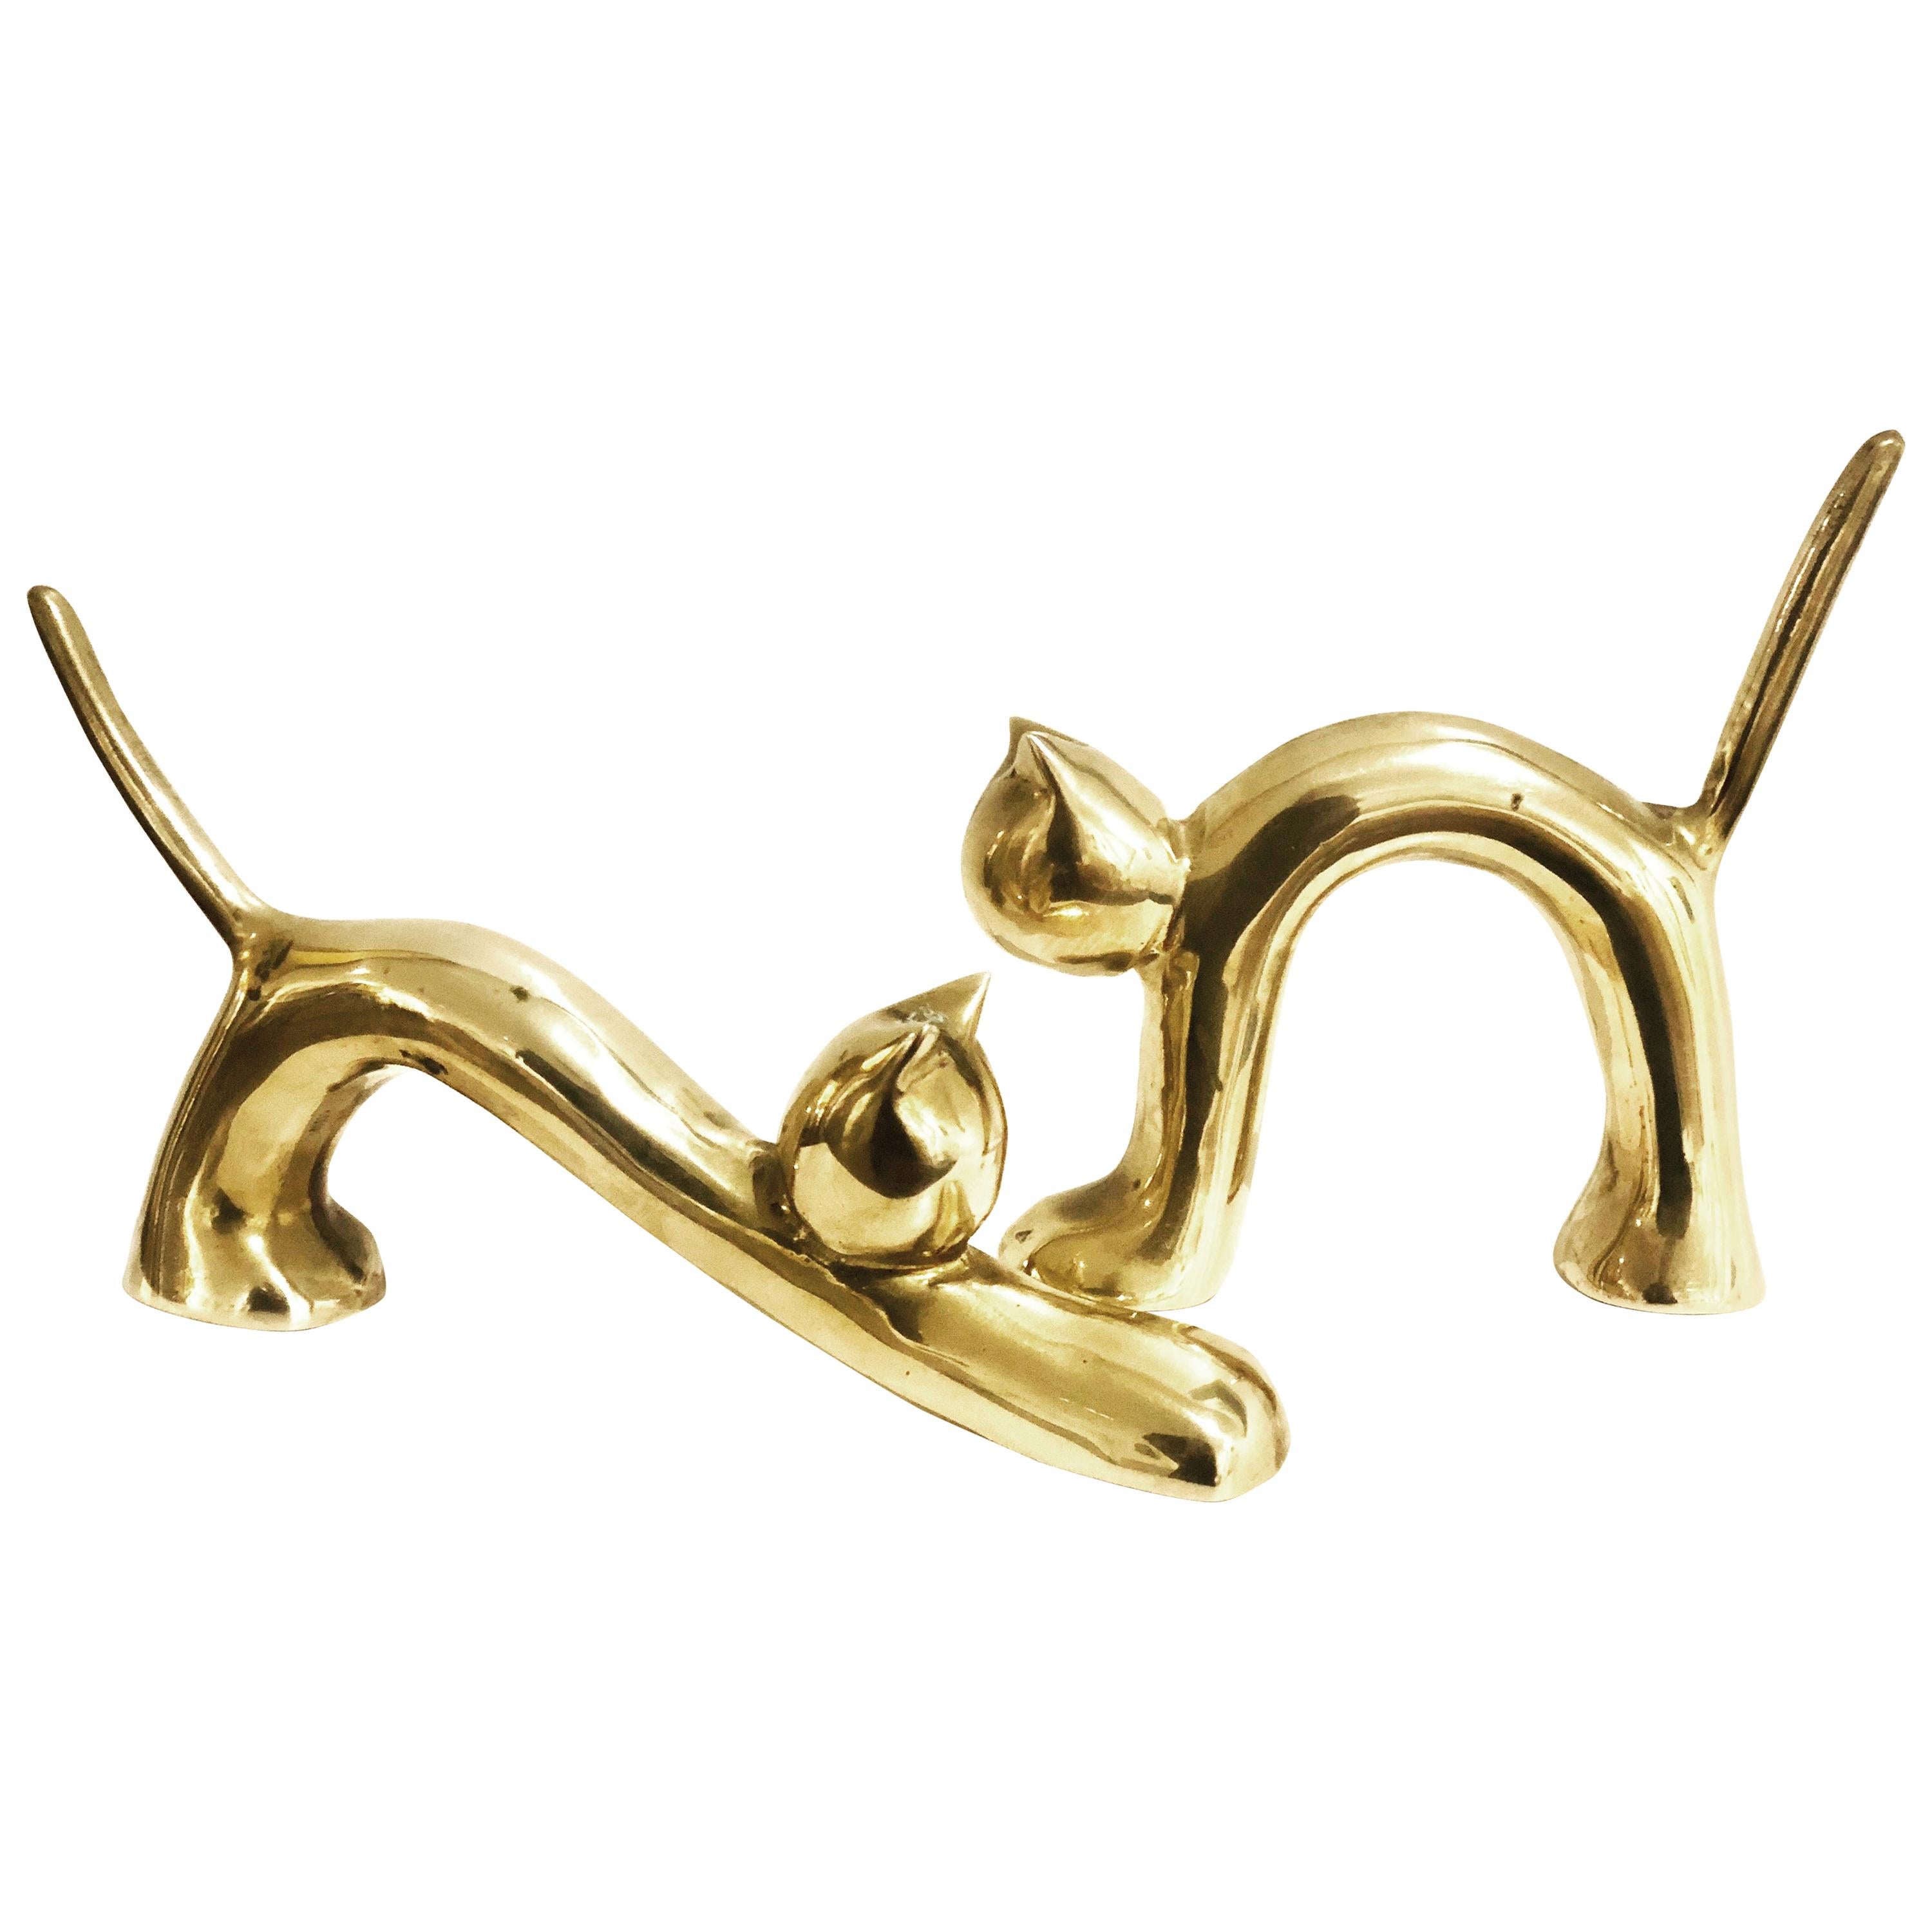 Pair of Polished Brass Art Deco Cat Sculptures